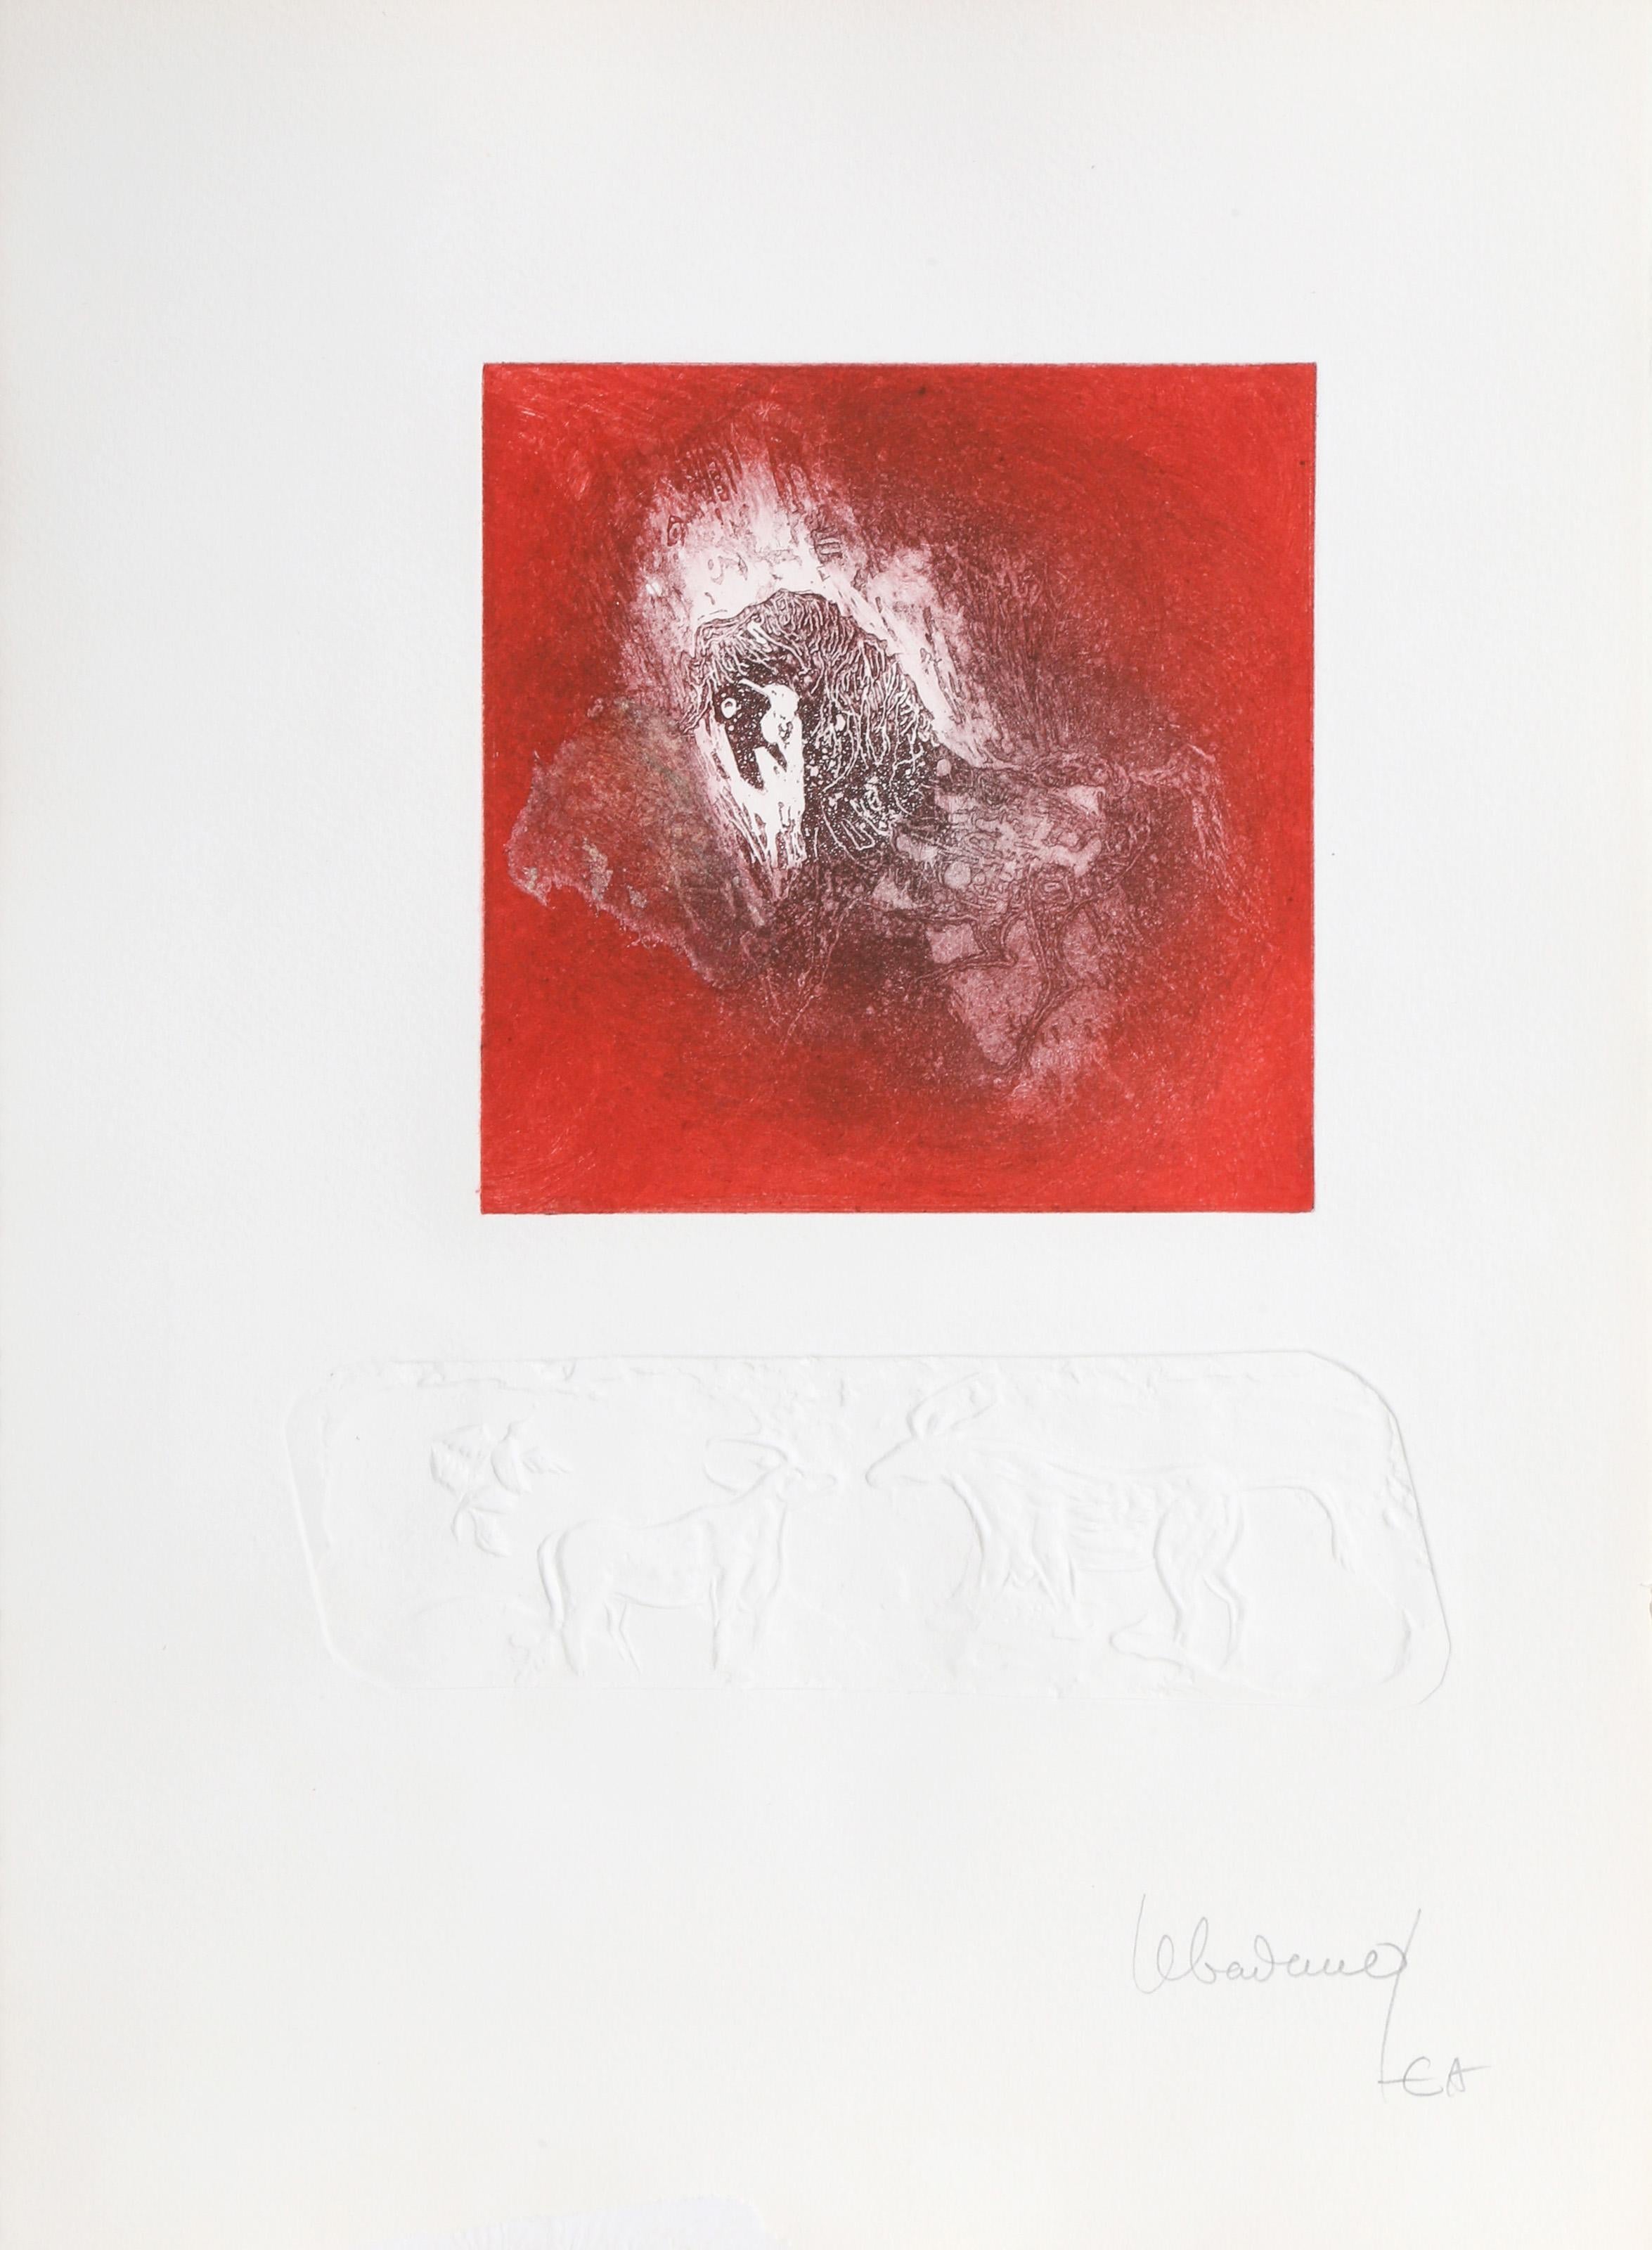 Lebadang (aka Hoi), Vietnamese (1922 - 2015) -  Red Horse. Year: circa 1970, Medium: Etching with Relief, signed and numbered in pencil, Edition: EA, Size: 15  x 11 in. (38.1  x 27.94 cm) 